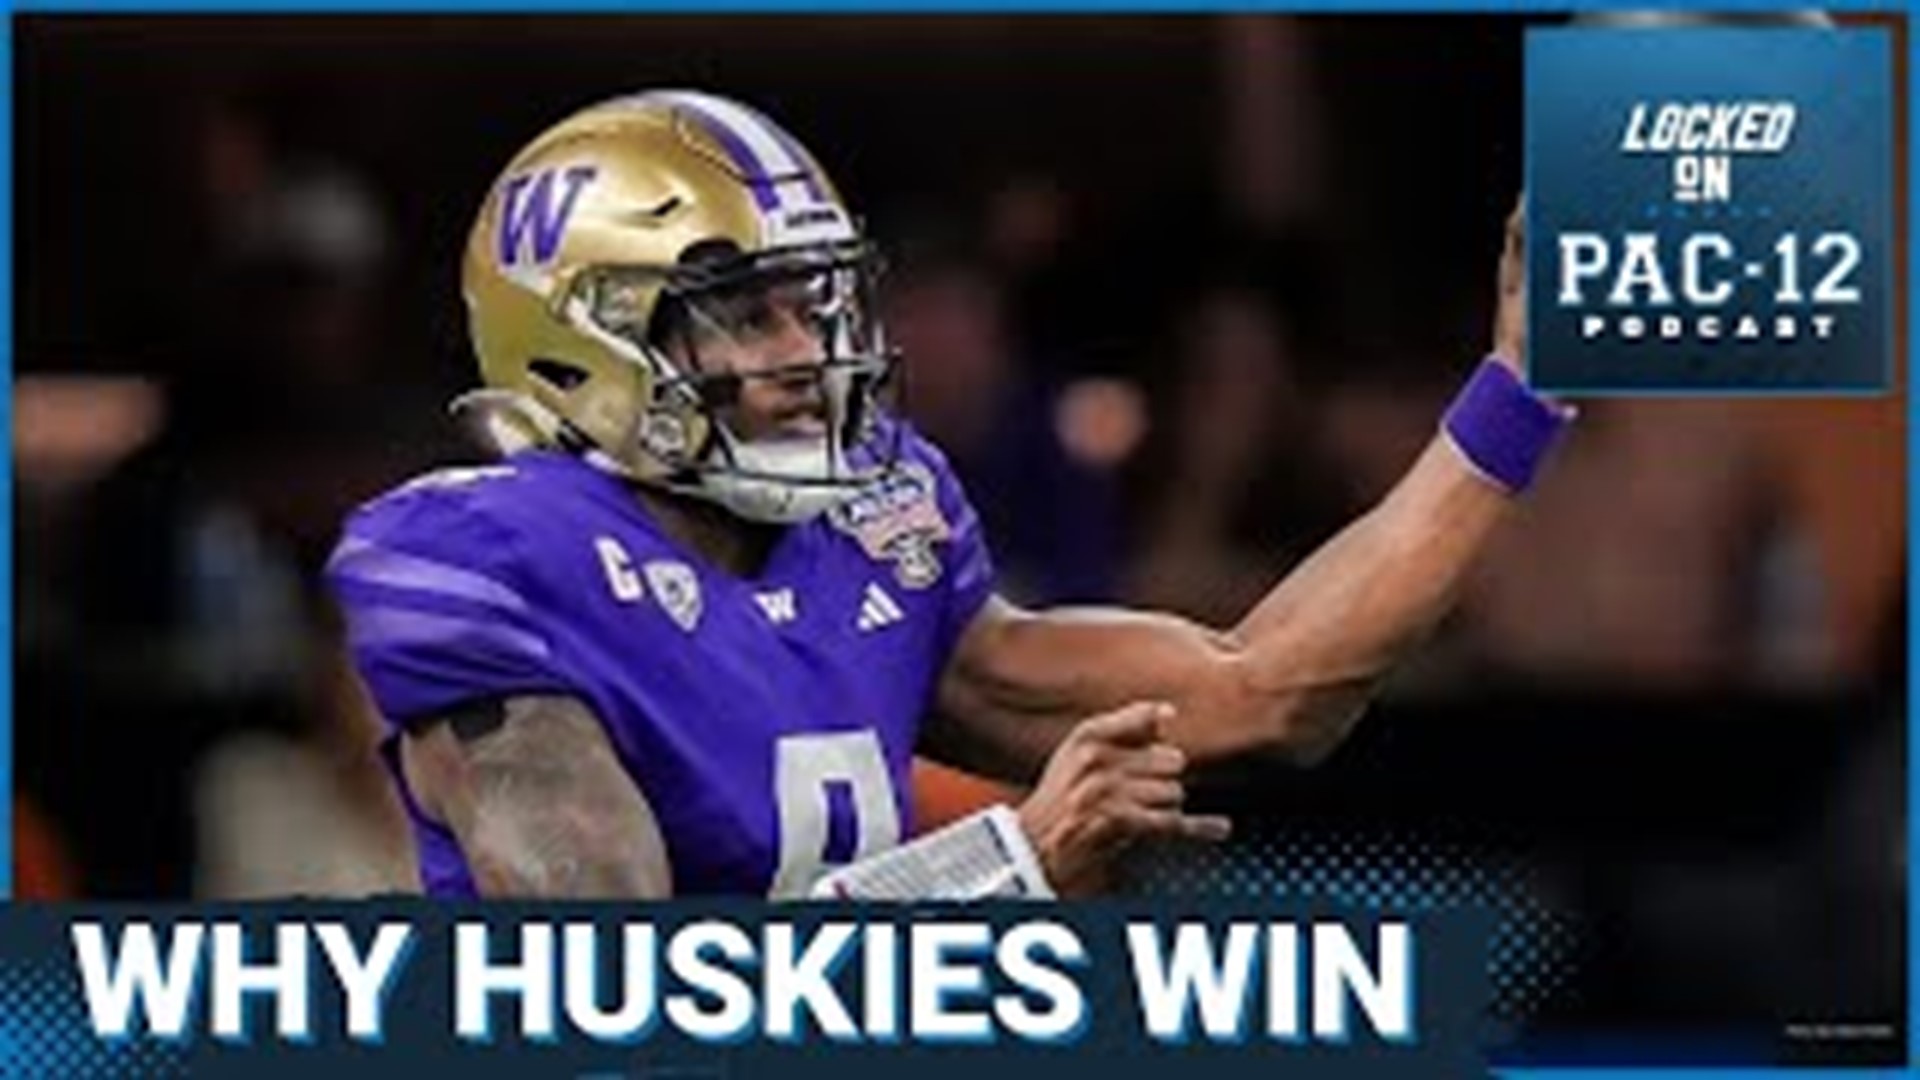 The Huskies enter Monday's "Big 10" matchup with the Wolverines boasting the best passing offense in the country.